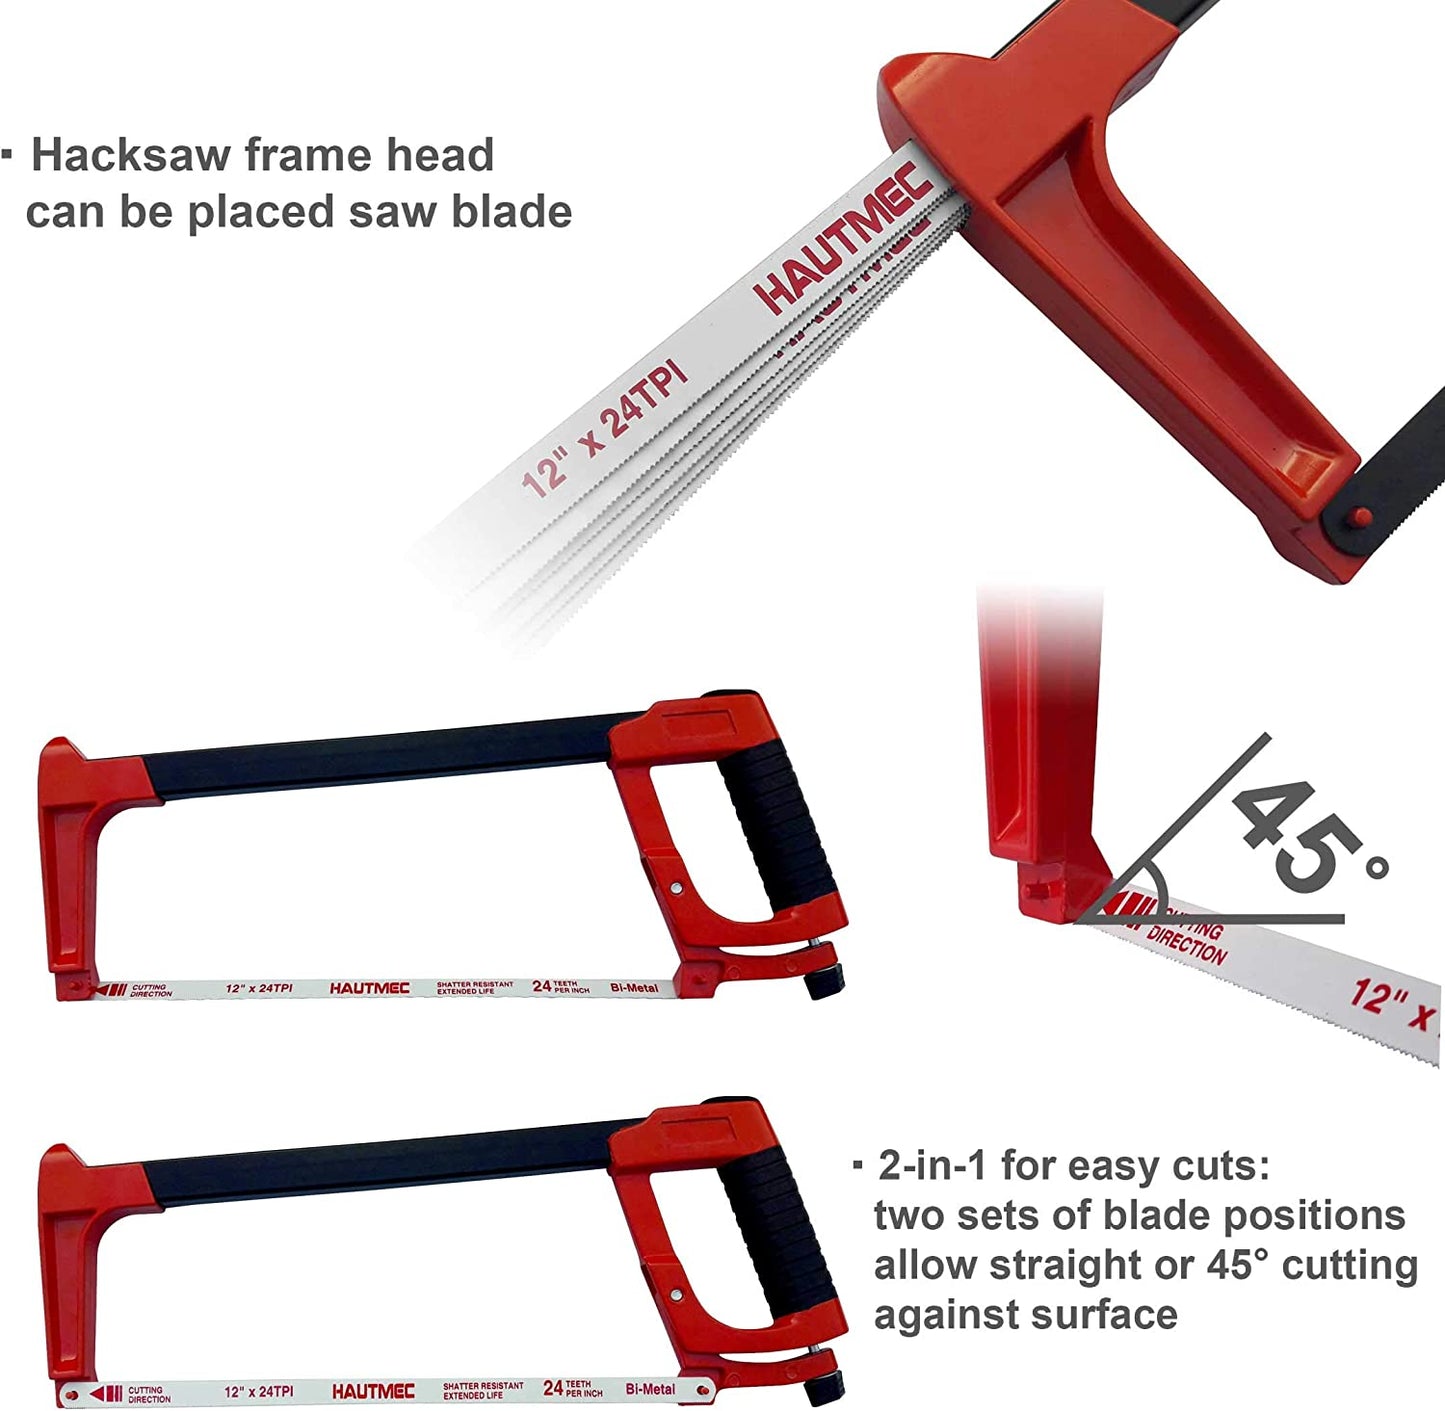 HAUTMEC 12 Inch Adjustable Hacksaw Frame With Blade Cabin, Heavy Duty 45°/90°2 Sawing Angles, 24 TPI High Tension Bi-metal HSS Blade, for Metal, Steel Pipe, PVC, Wood HT0015-CT